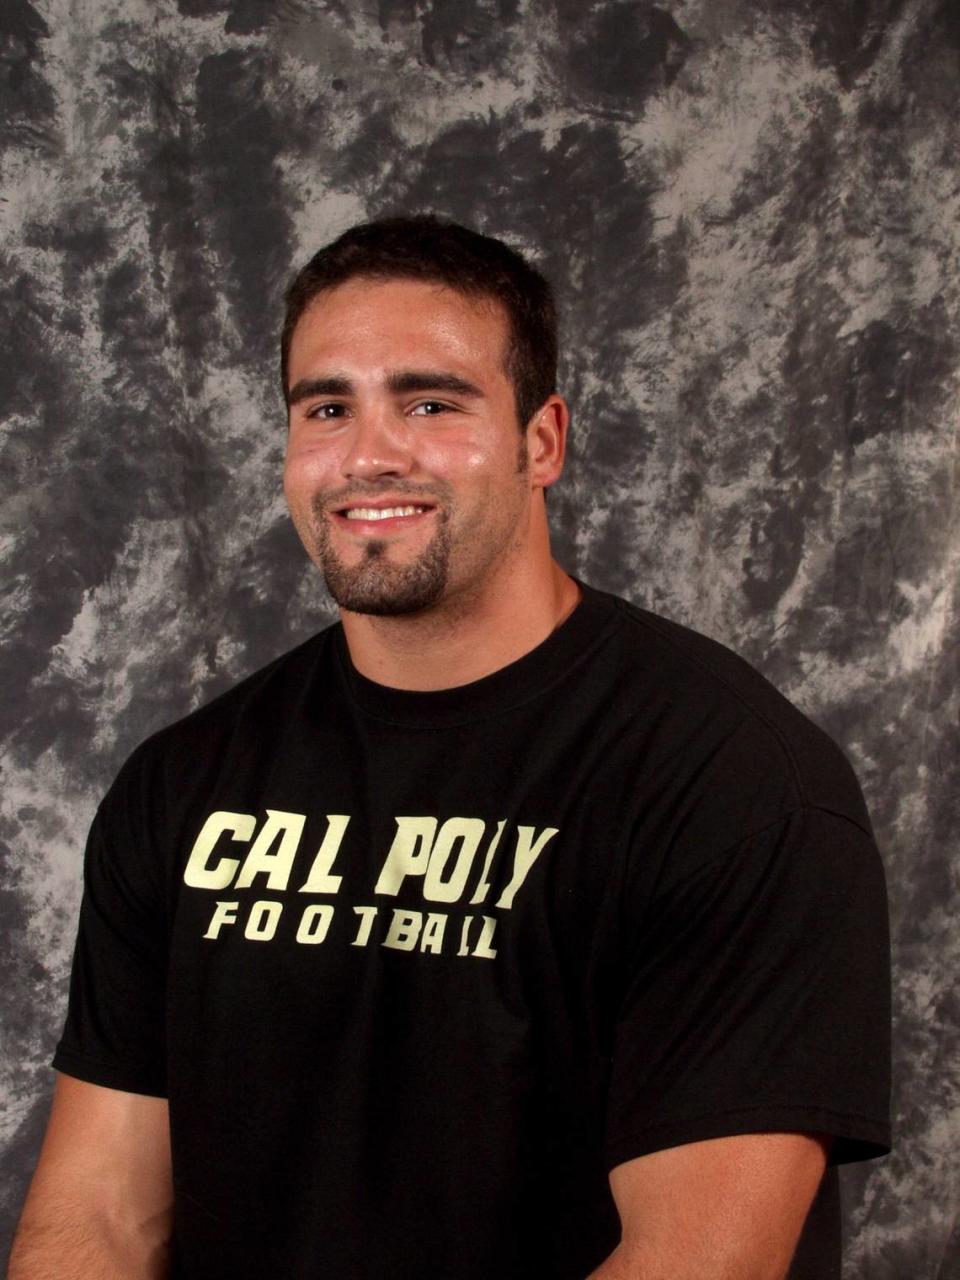 Matthew Chachere was a linebacker on the Cal Poly football team from 2001 to 2005. The San Luis Obispo resident and his girlfriend, Jennifer Besser, died after apparently being hit by a car on Nov. 21, 2022.